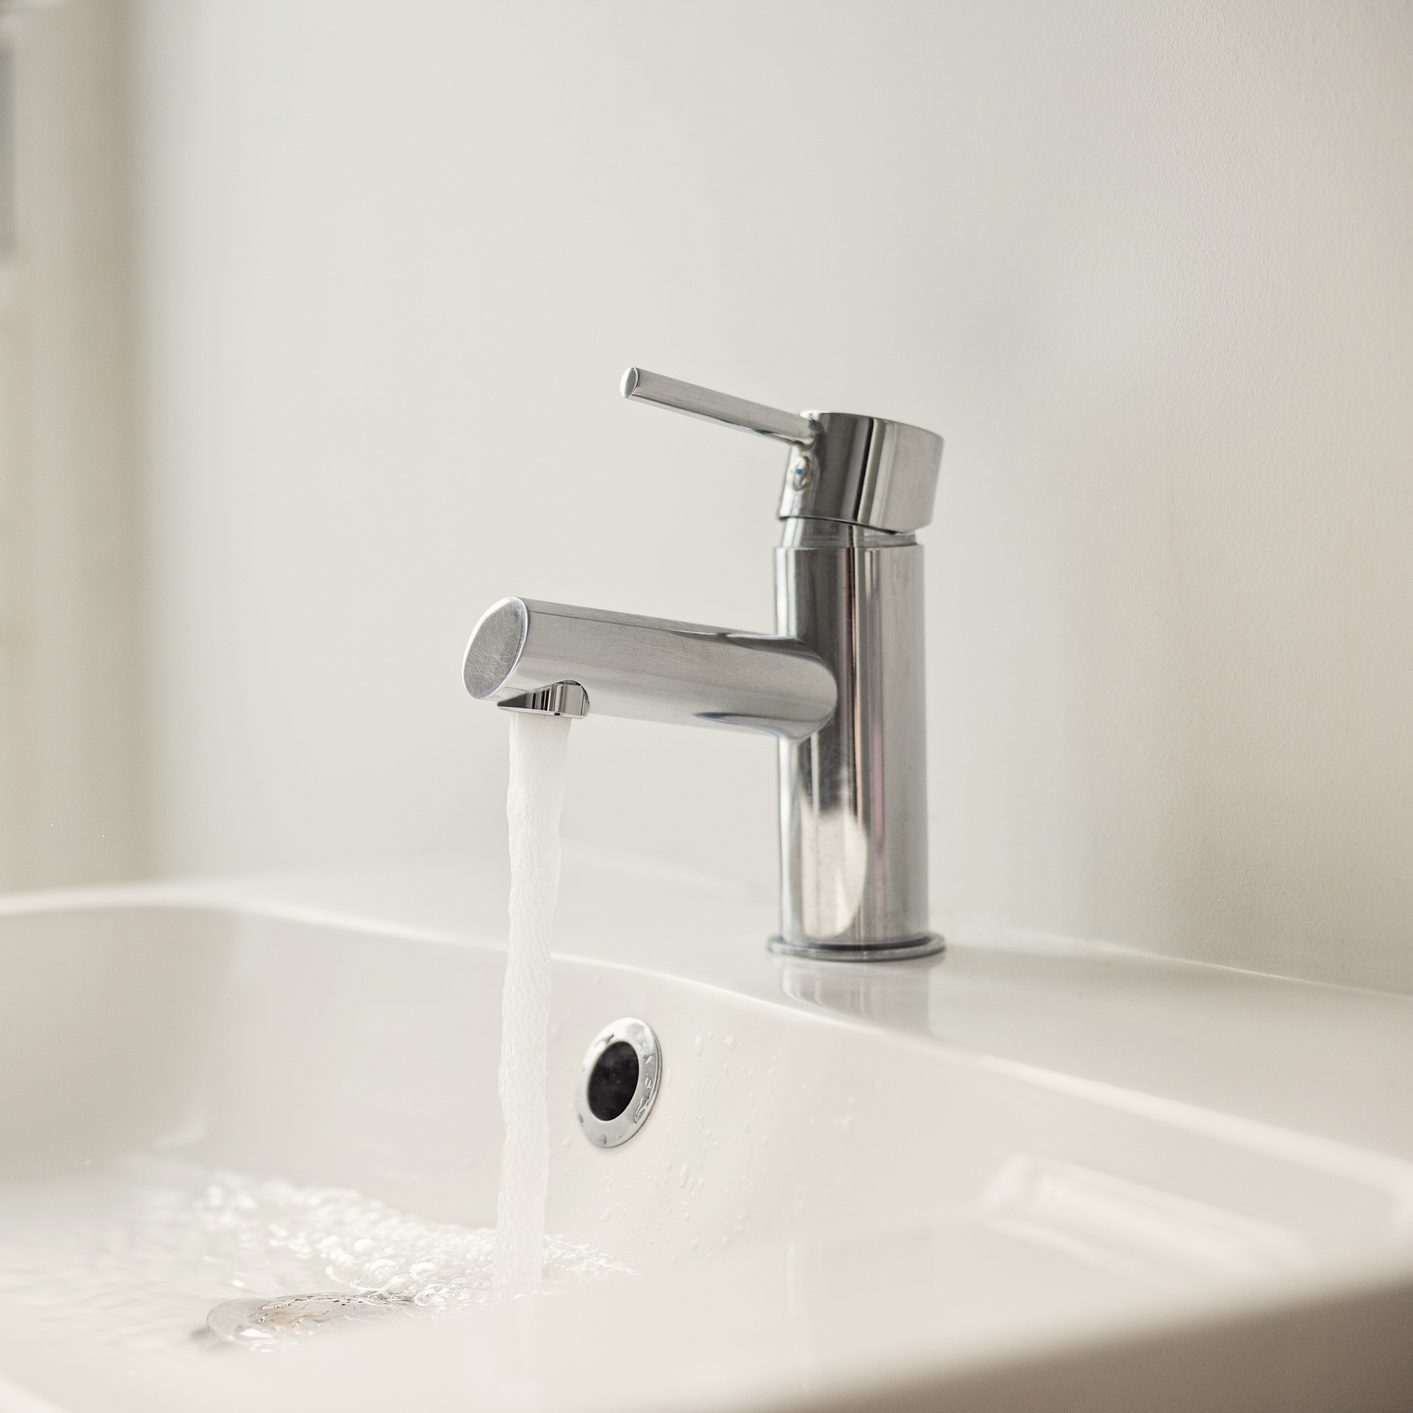 10 Tips for Installing a Faucet the Easy Way